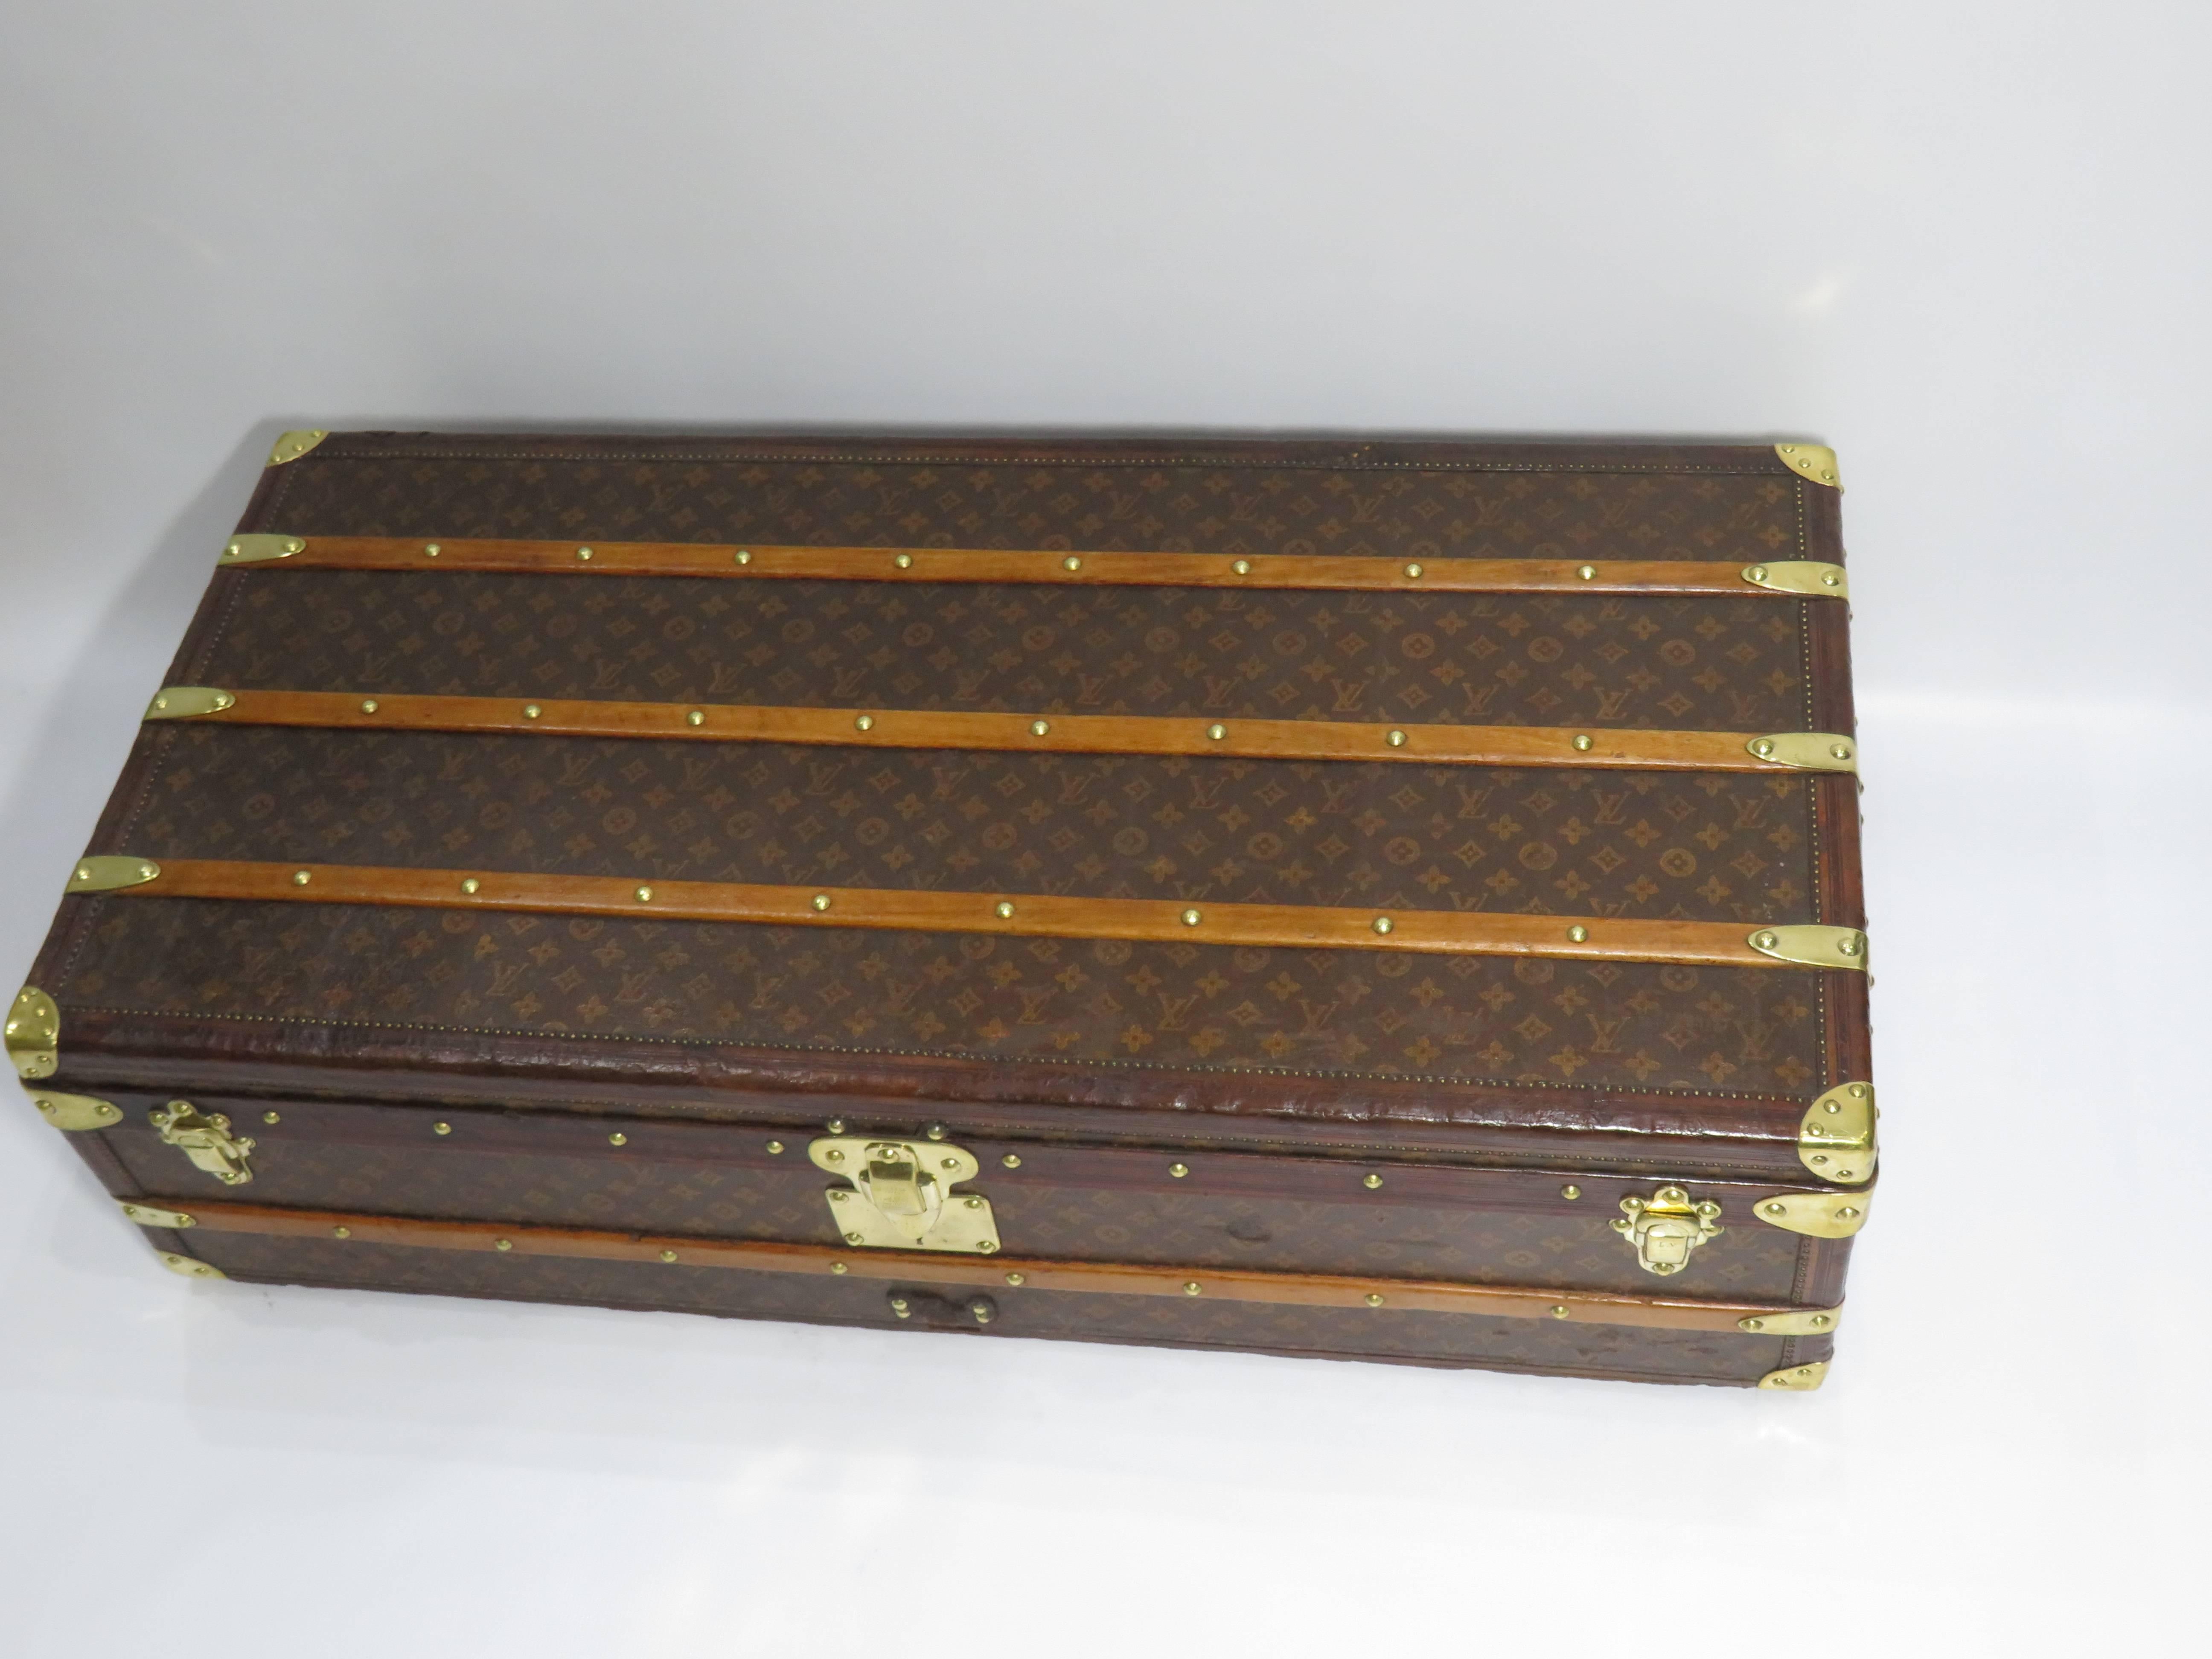 A really nice example of leather/brass monogram cabin trunk by Louis Vuitton from the beginning of the 20th century.